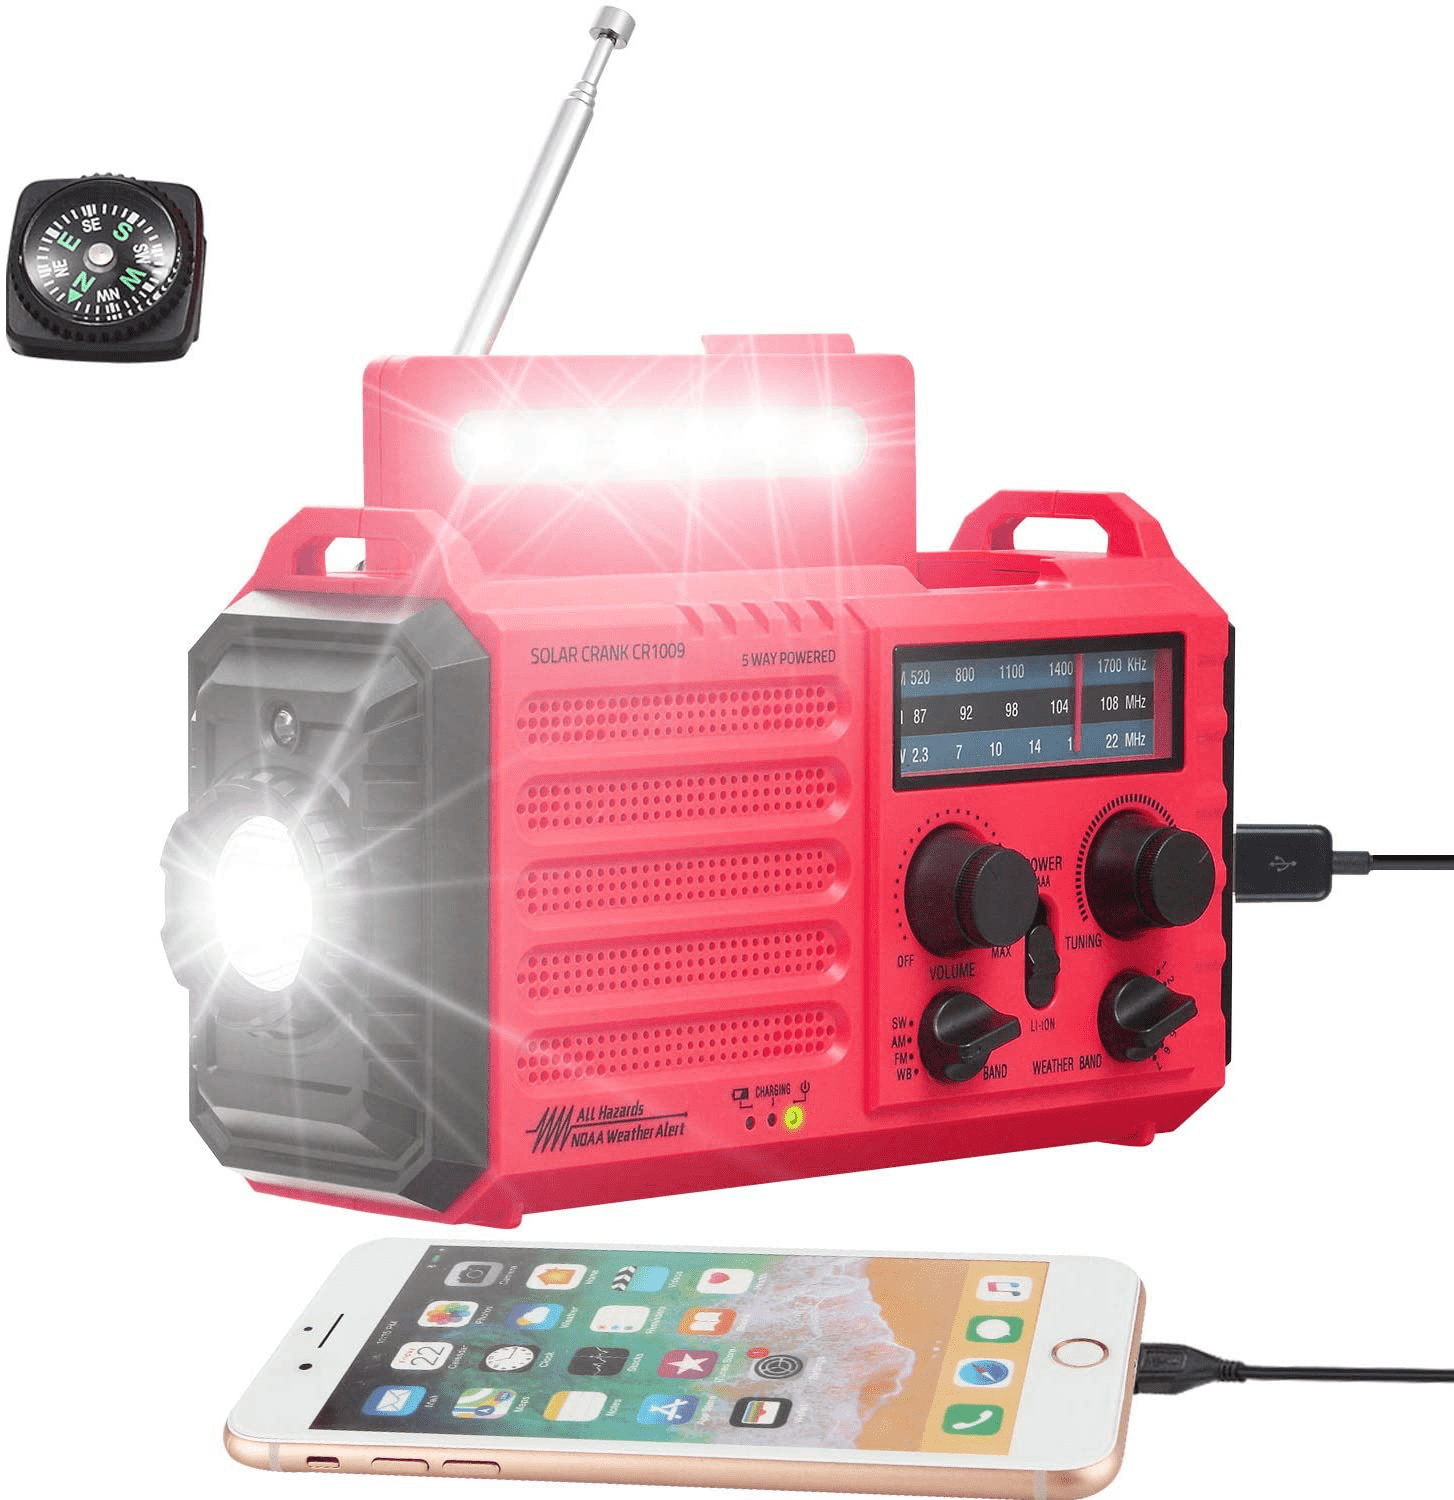 Rocam Emergency Hand Crank Portable Radio Solar Power AM/FM/SW/NOAA Weather Radio with 2000mAh Power Bank Phone Charger SOS Alarm and Compass Green 7 Weather Band 3W LED Flashlight Reading Lamp 